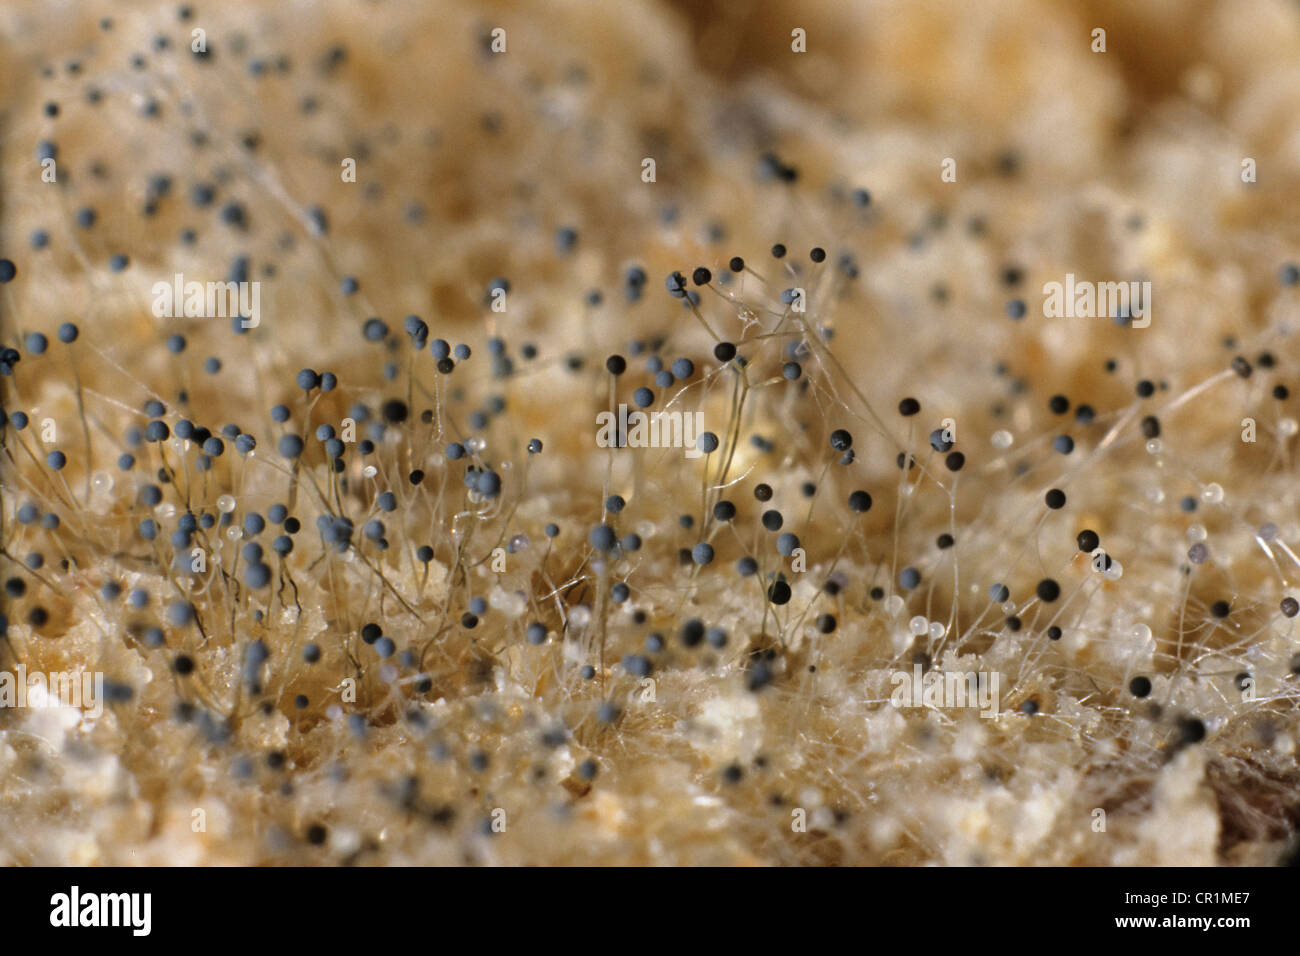 Bread mould under a microscope, white mould, fungus (Mucor sp.), Germany, Europe Stock Photo